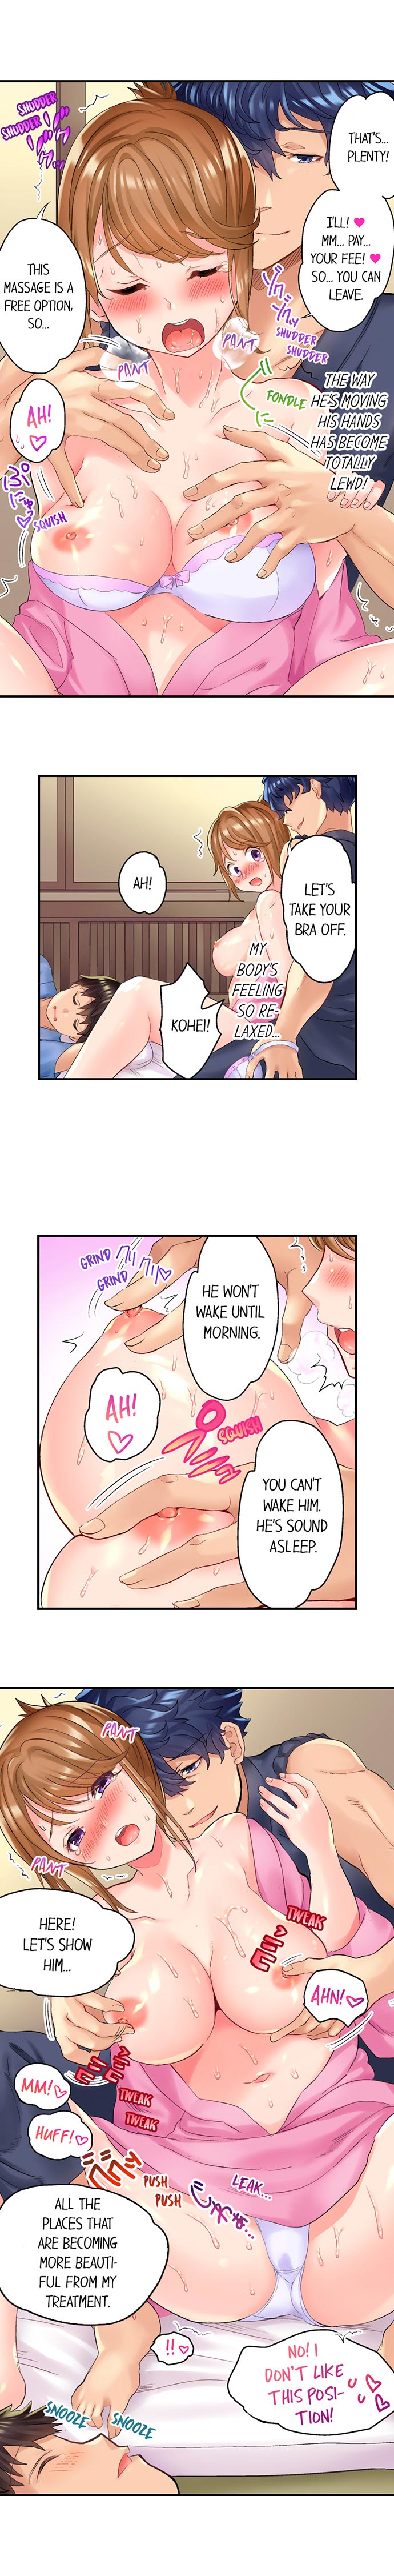 NTR Massage - Chapter 3 Page 3